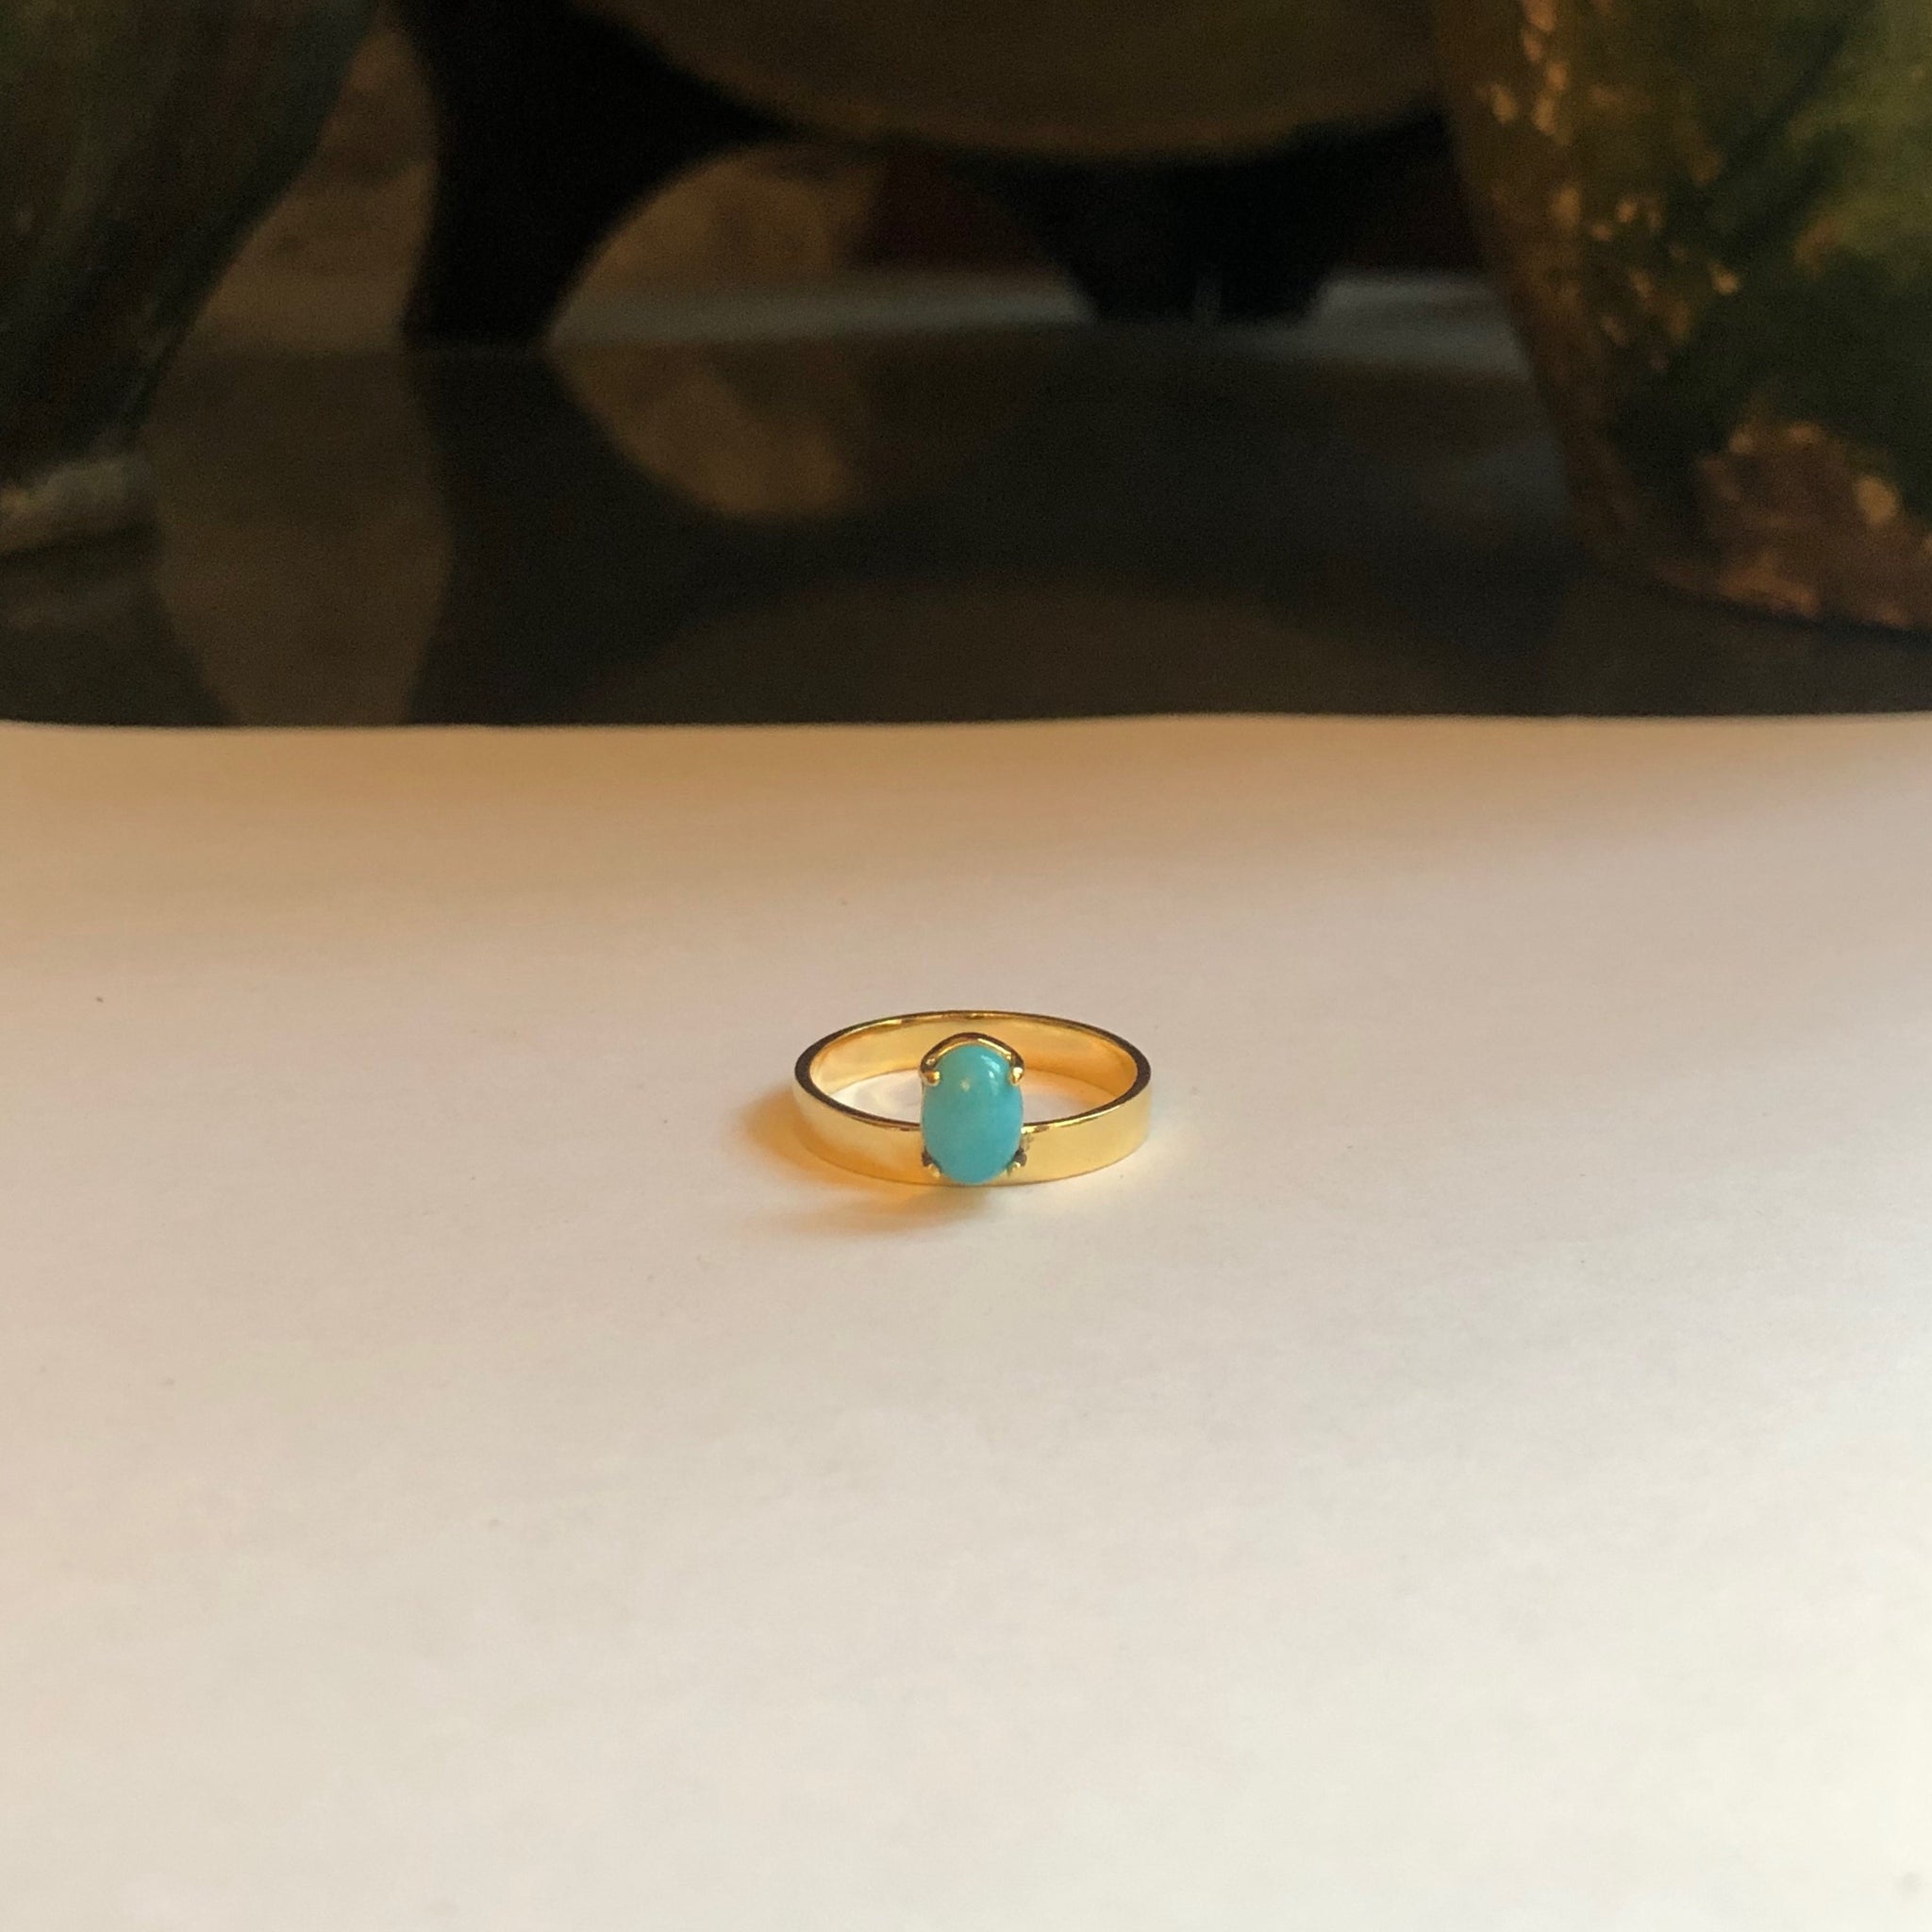 Band Ring with Oval Turquoise, Solid 14k Gold | ONE-OF-A-KIND